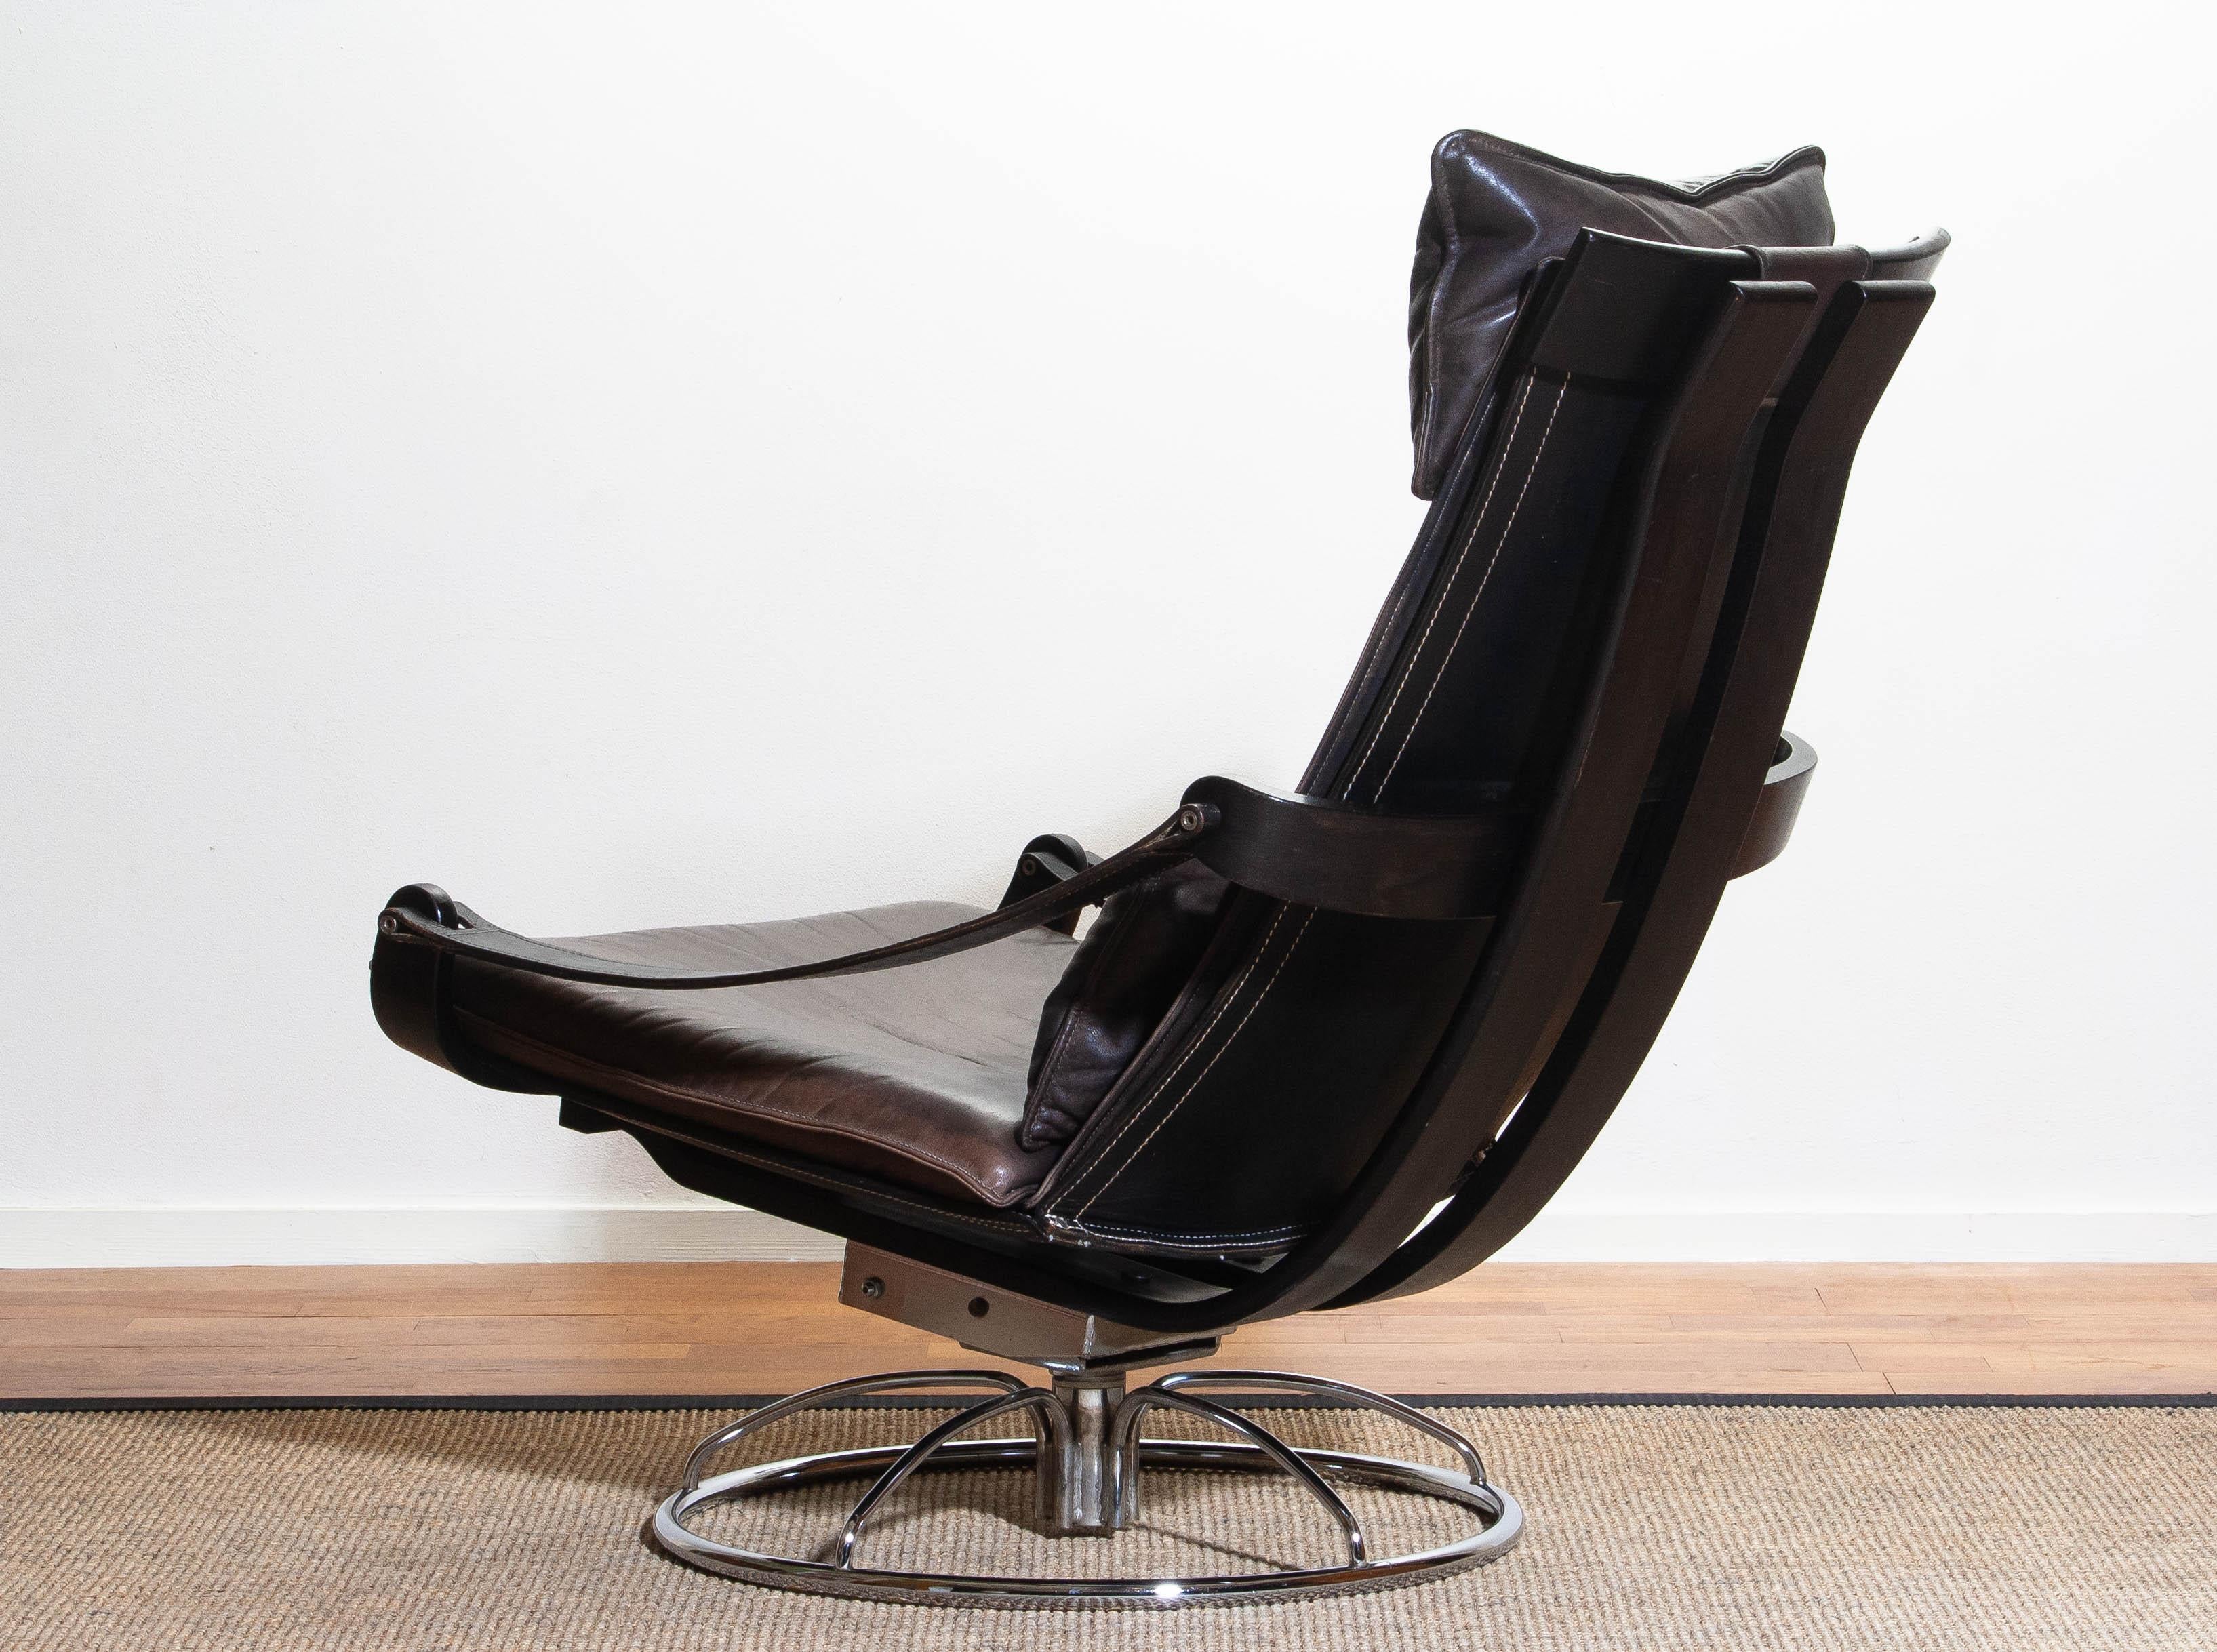 1970s Artistic Leather Swivel / Relax Chair by Ake Fribytter for Nelo Sweden 2